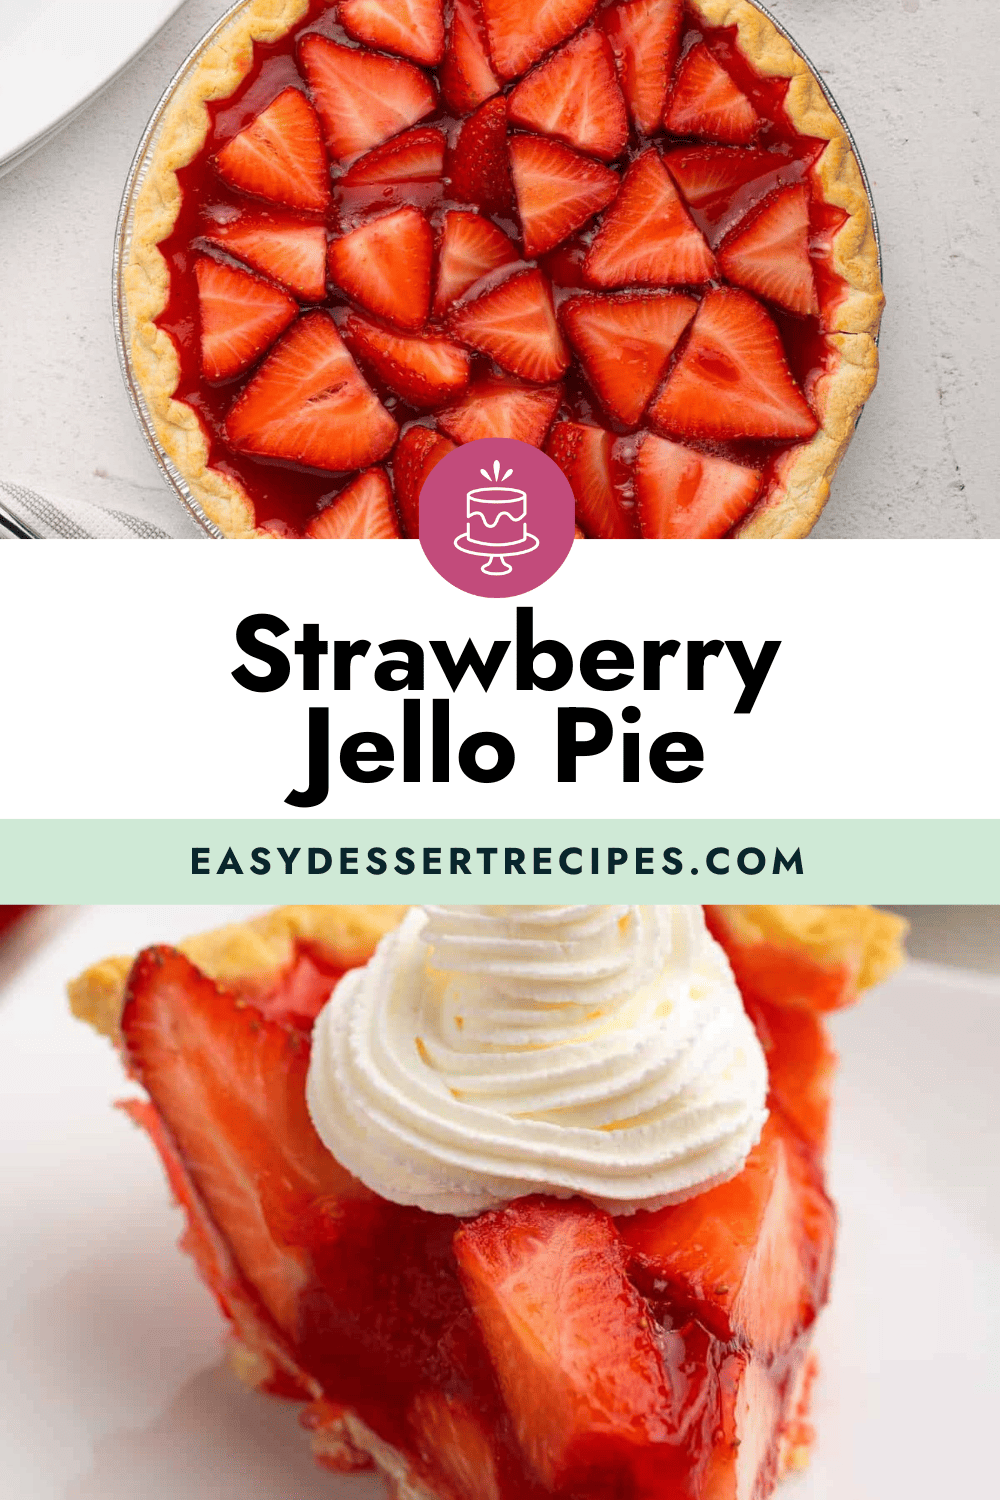 strawberry jello pie with whipped cream and strawberries.